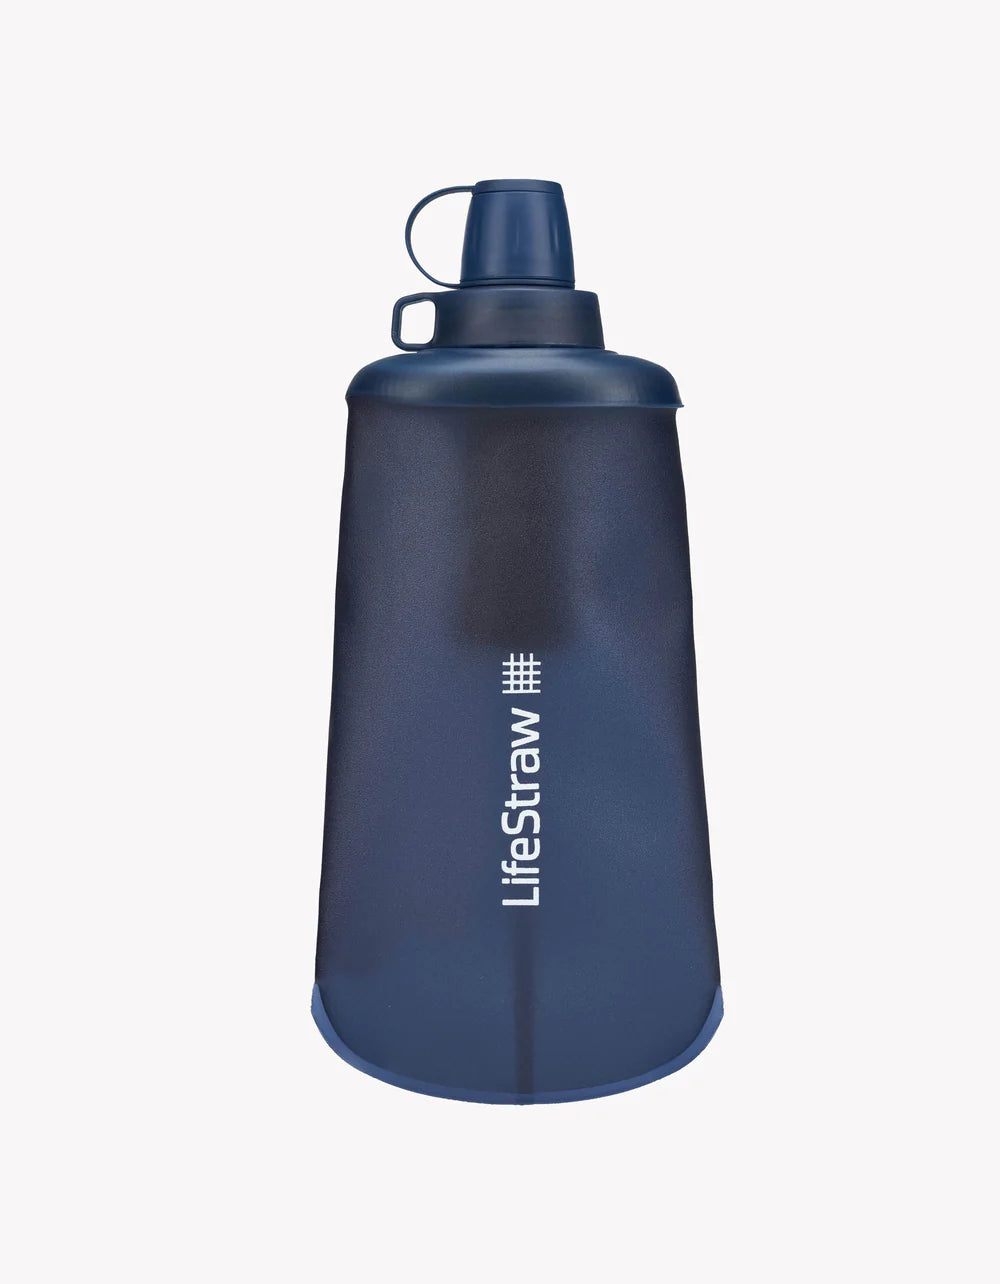 LifeStraw Peak Series Collapsible Squeeze Bottle w/Filter